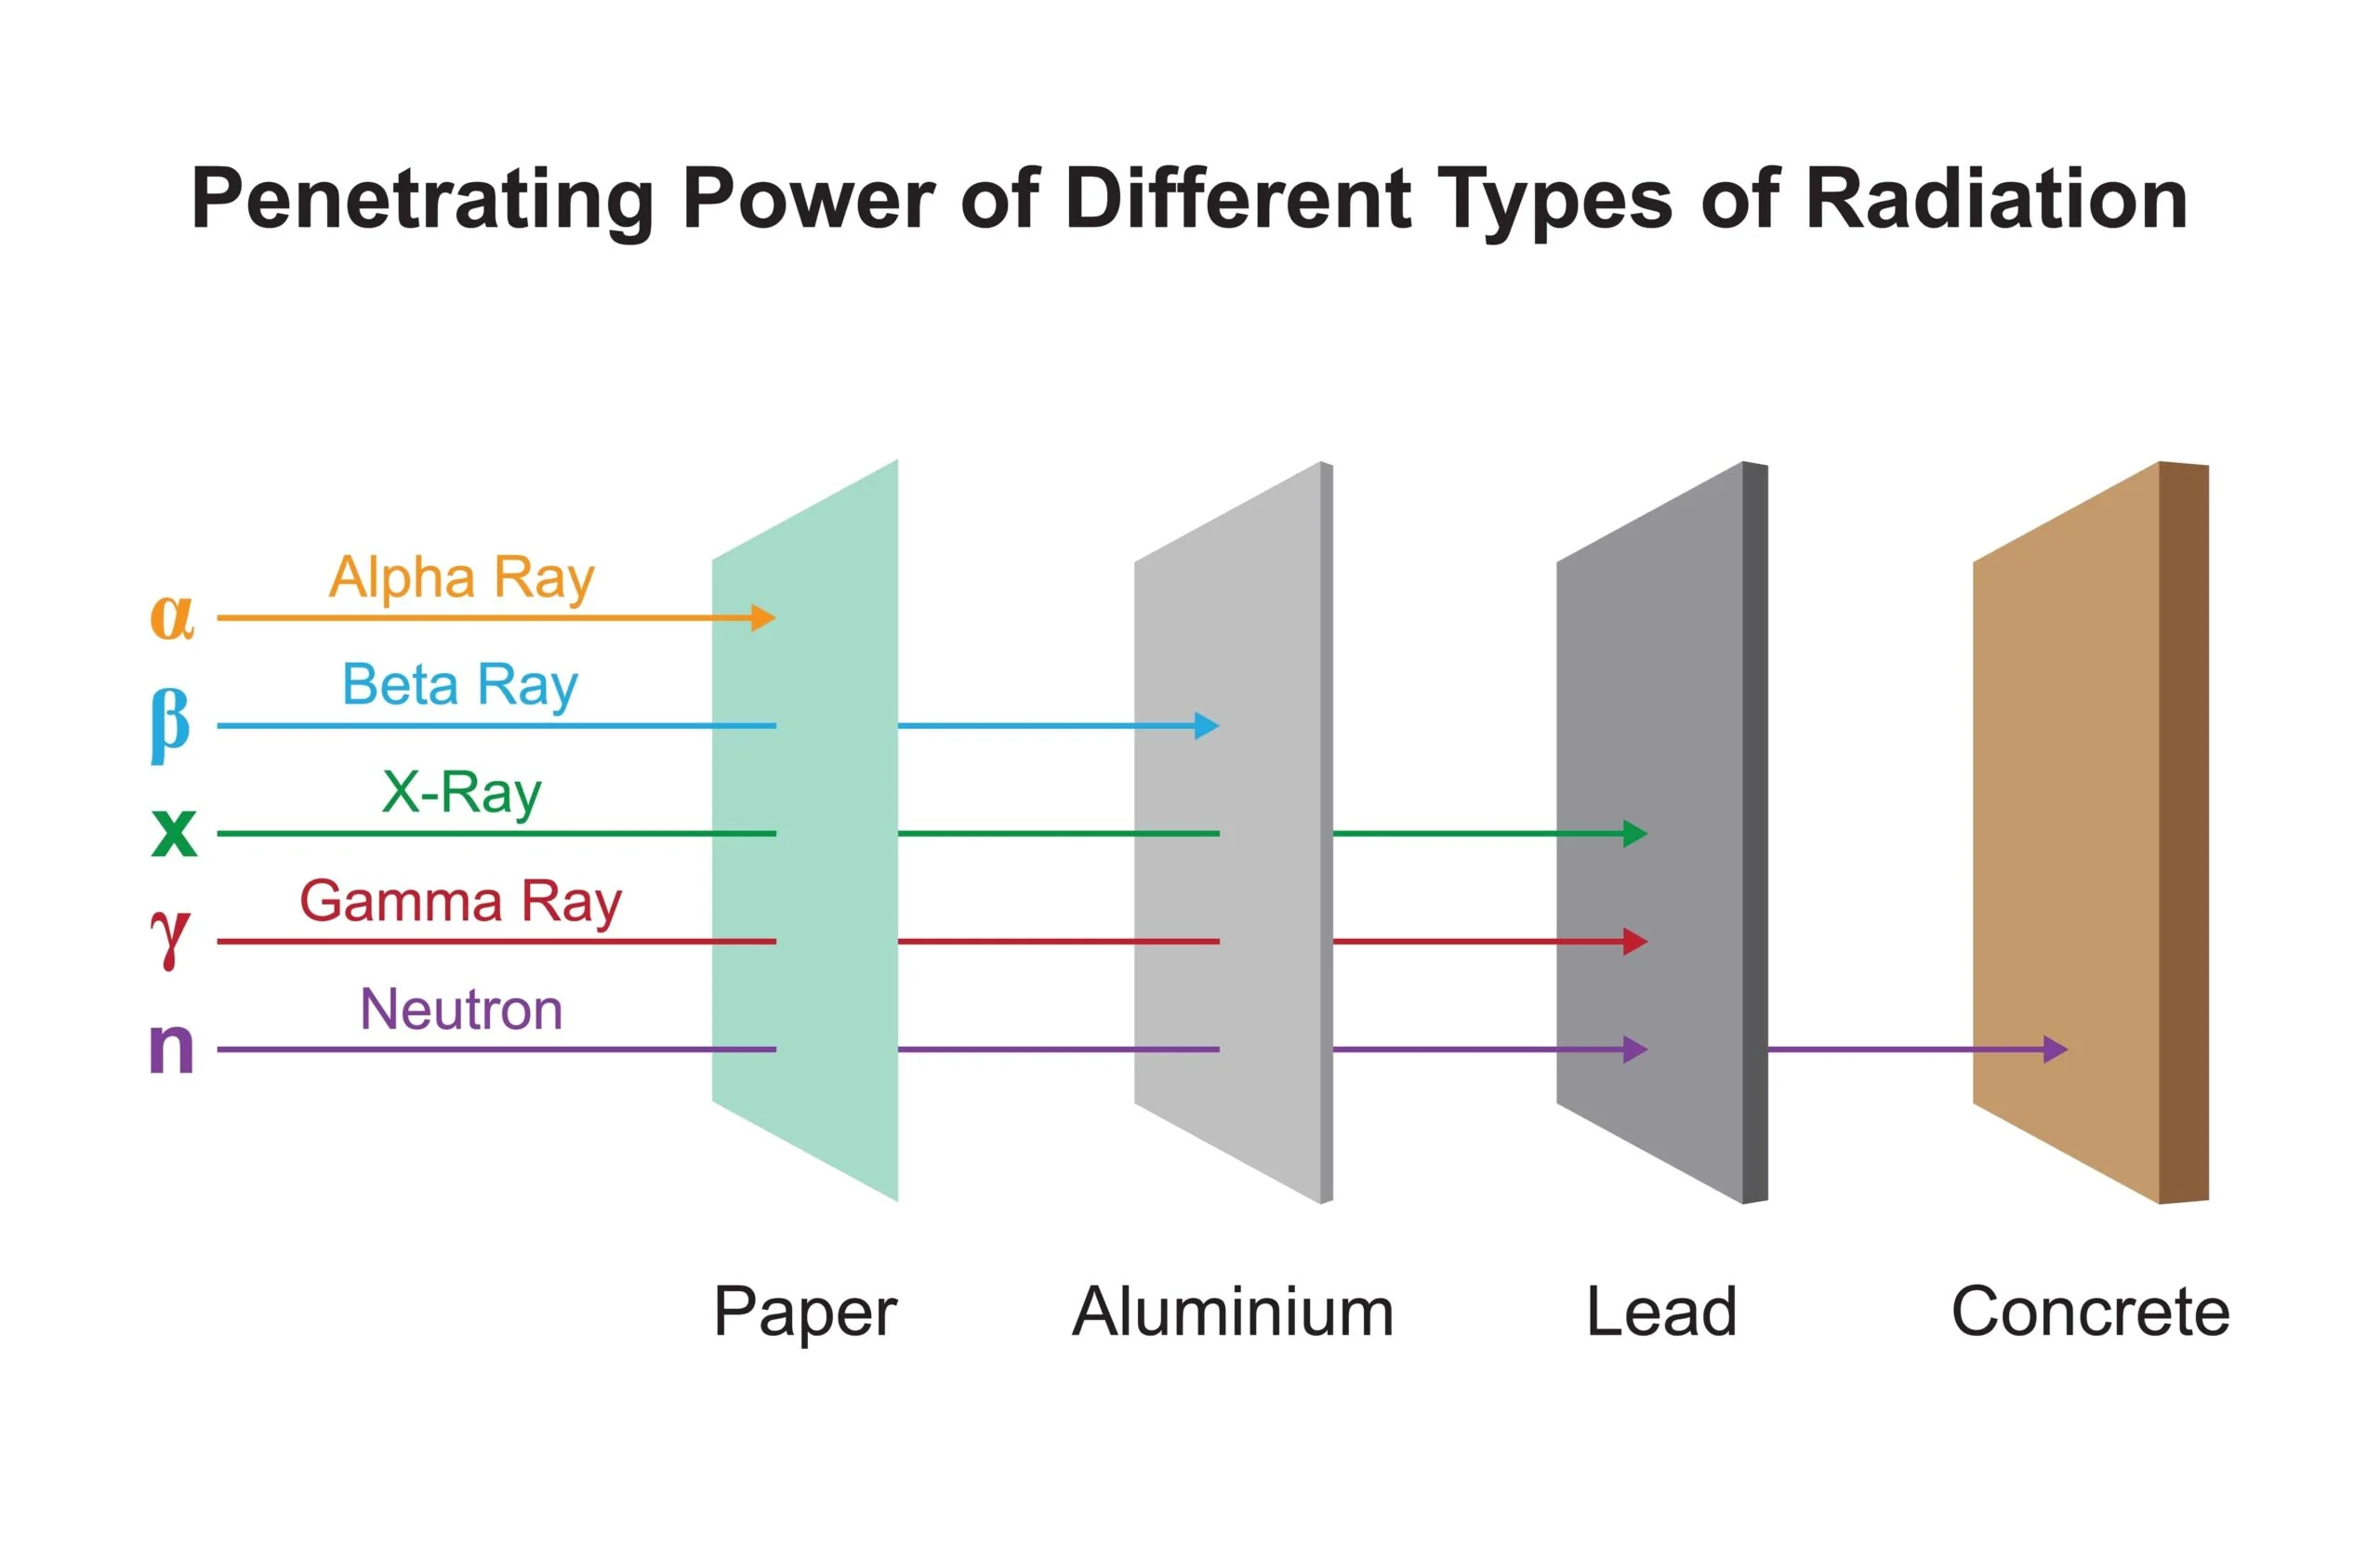 Penetrating-power-of-different-types-of-radiation-scaled